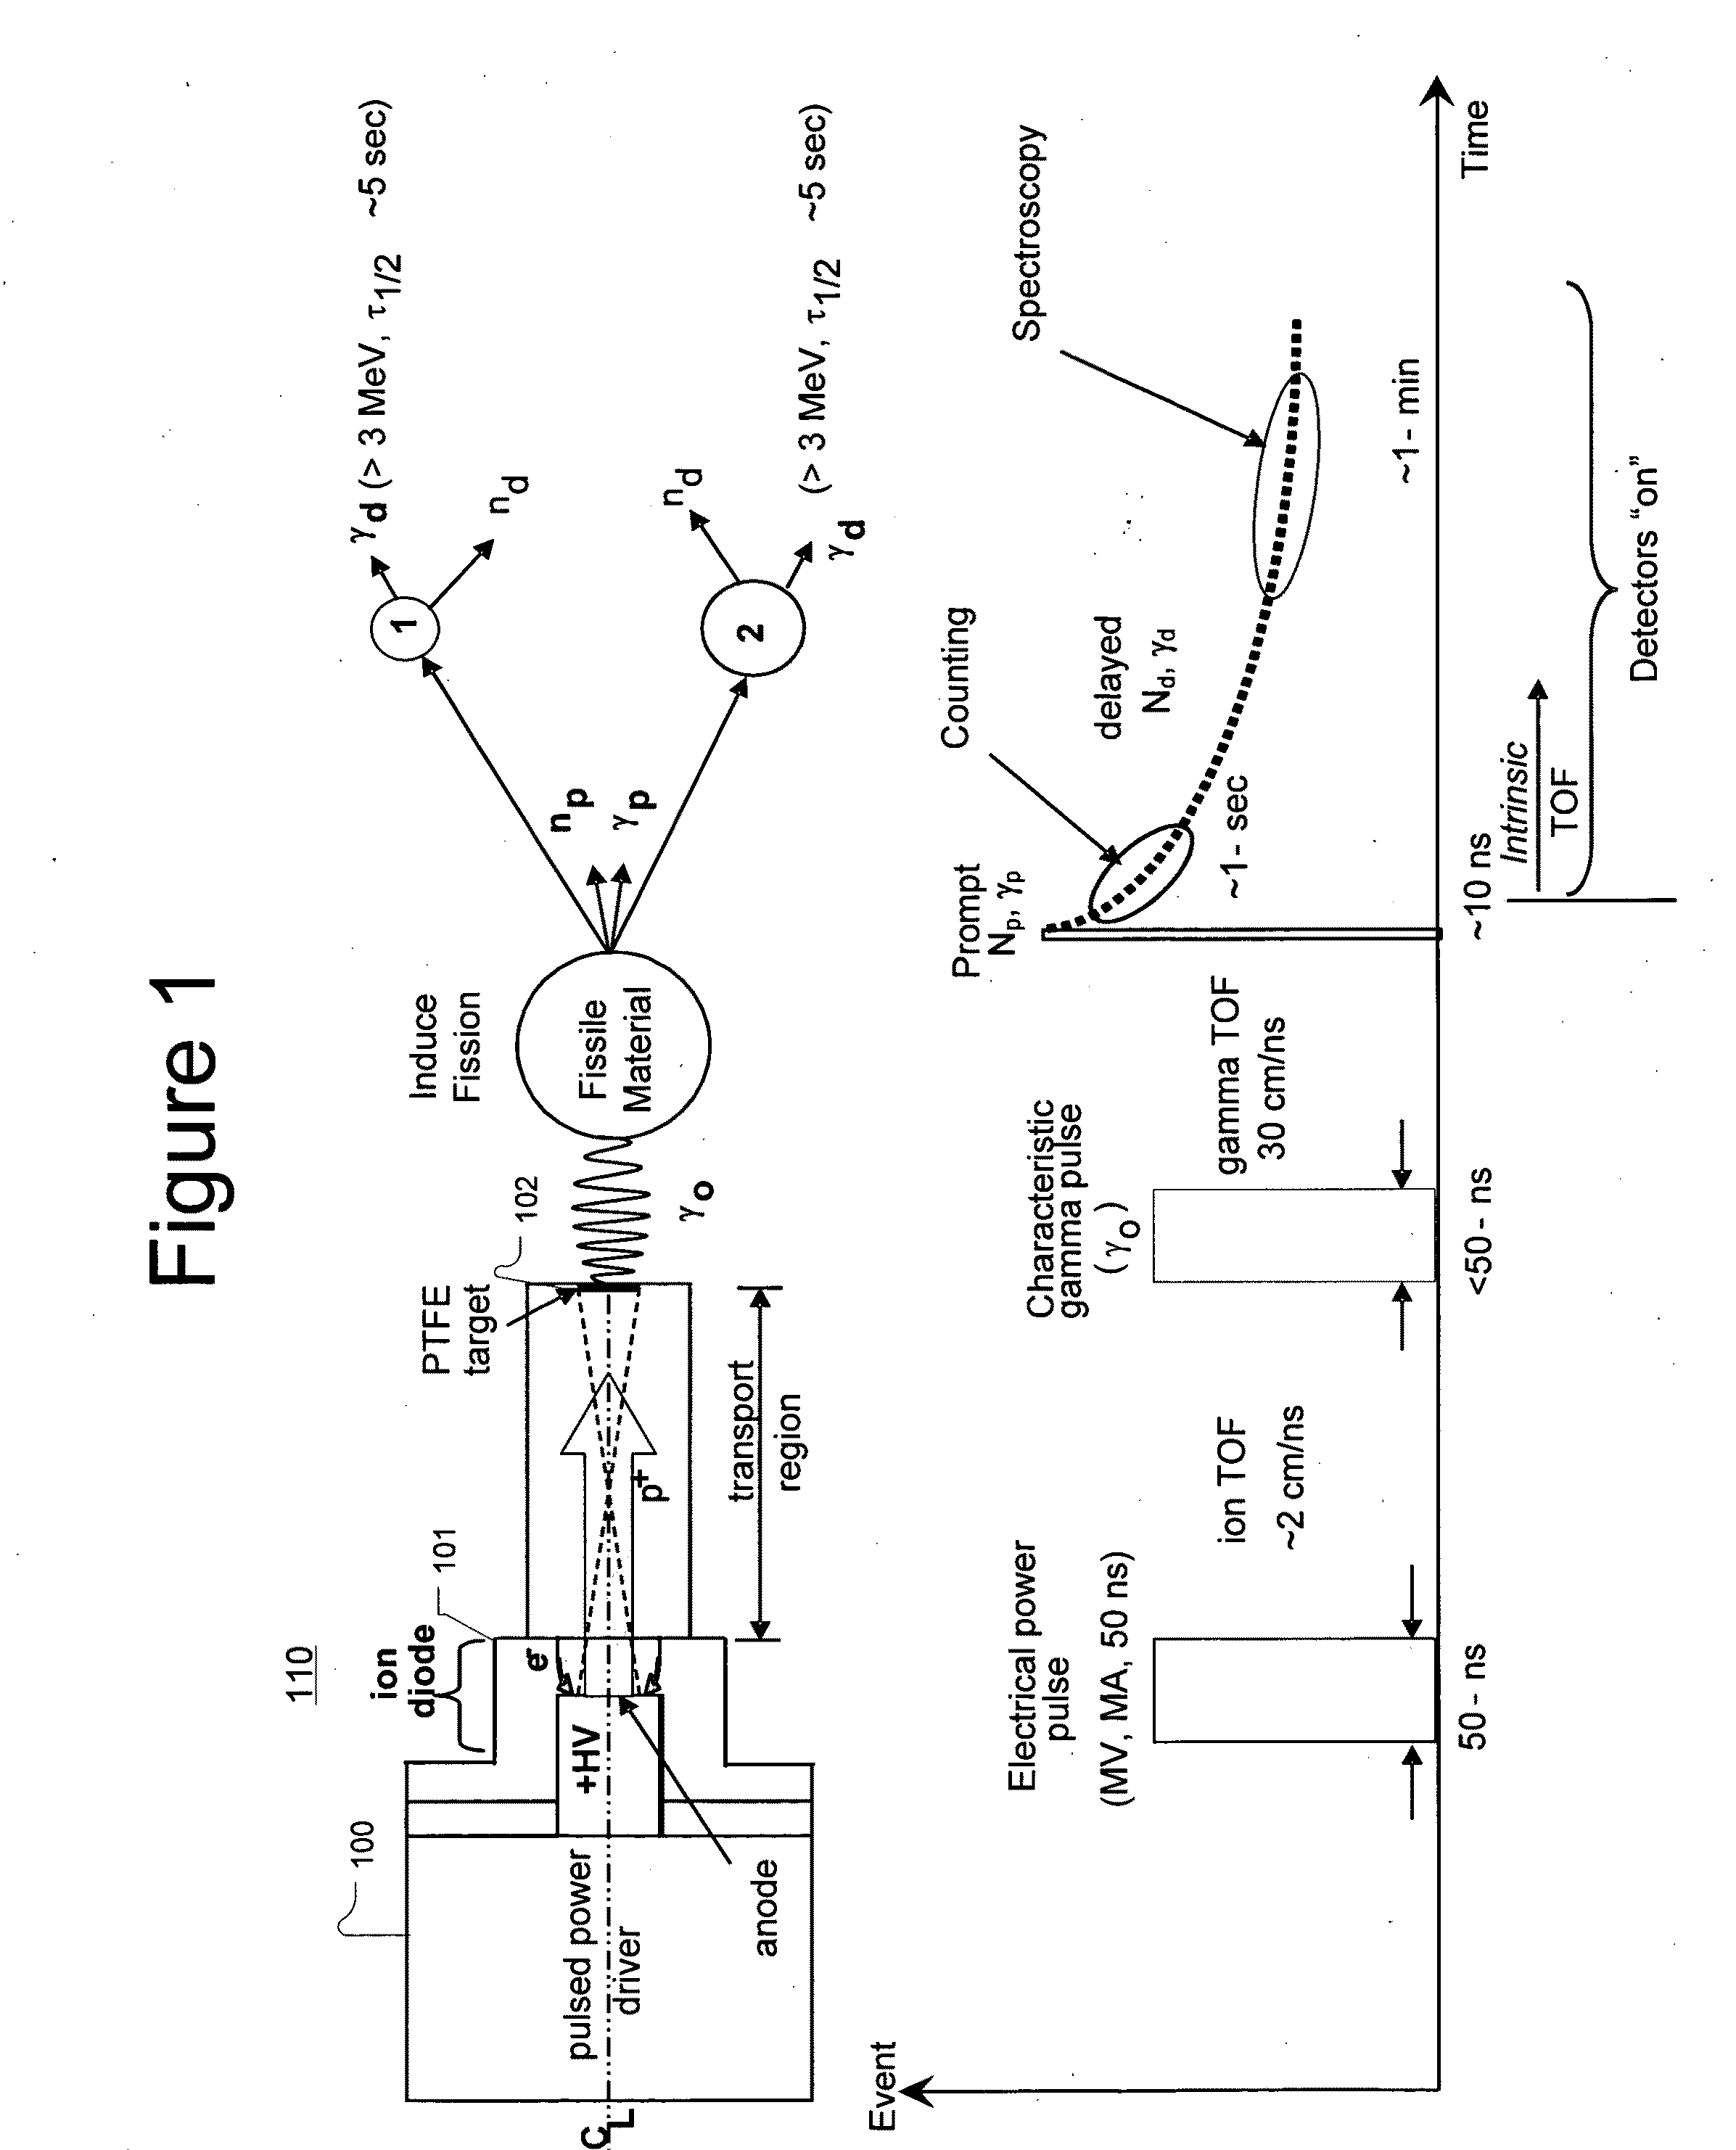 Rediation detector system for locating and identifying special nuclear material in moving vehicles